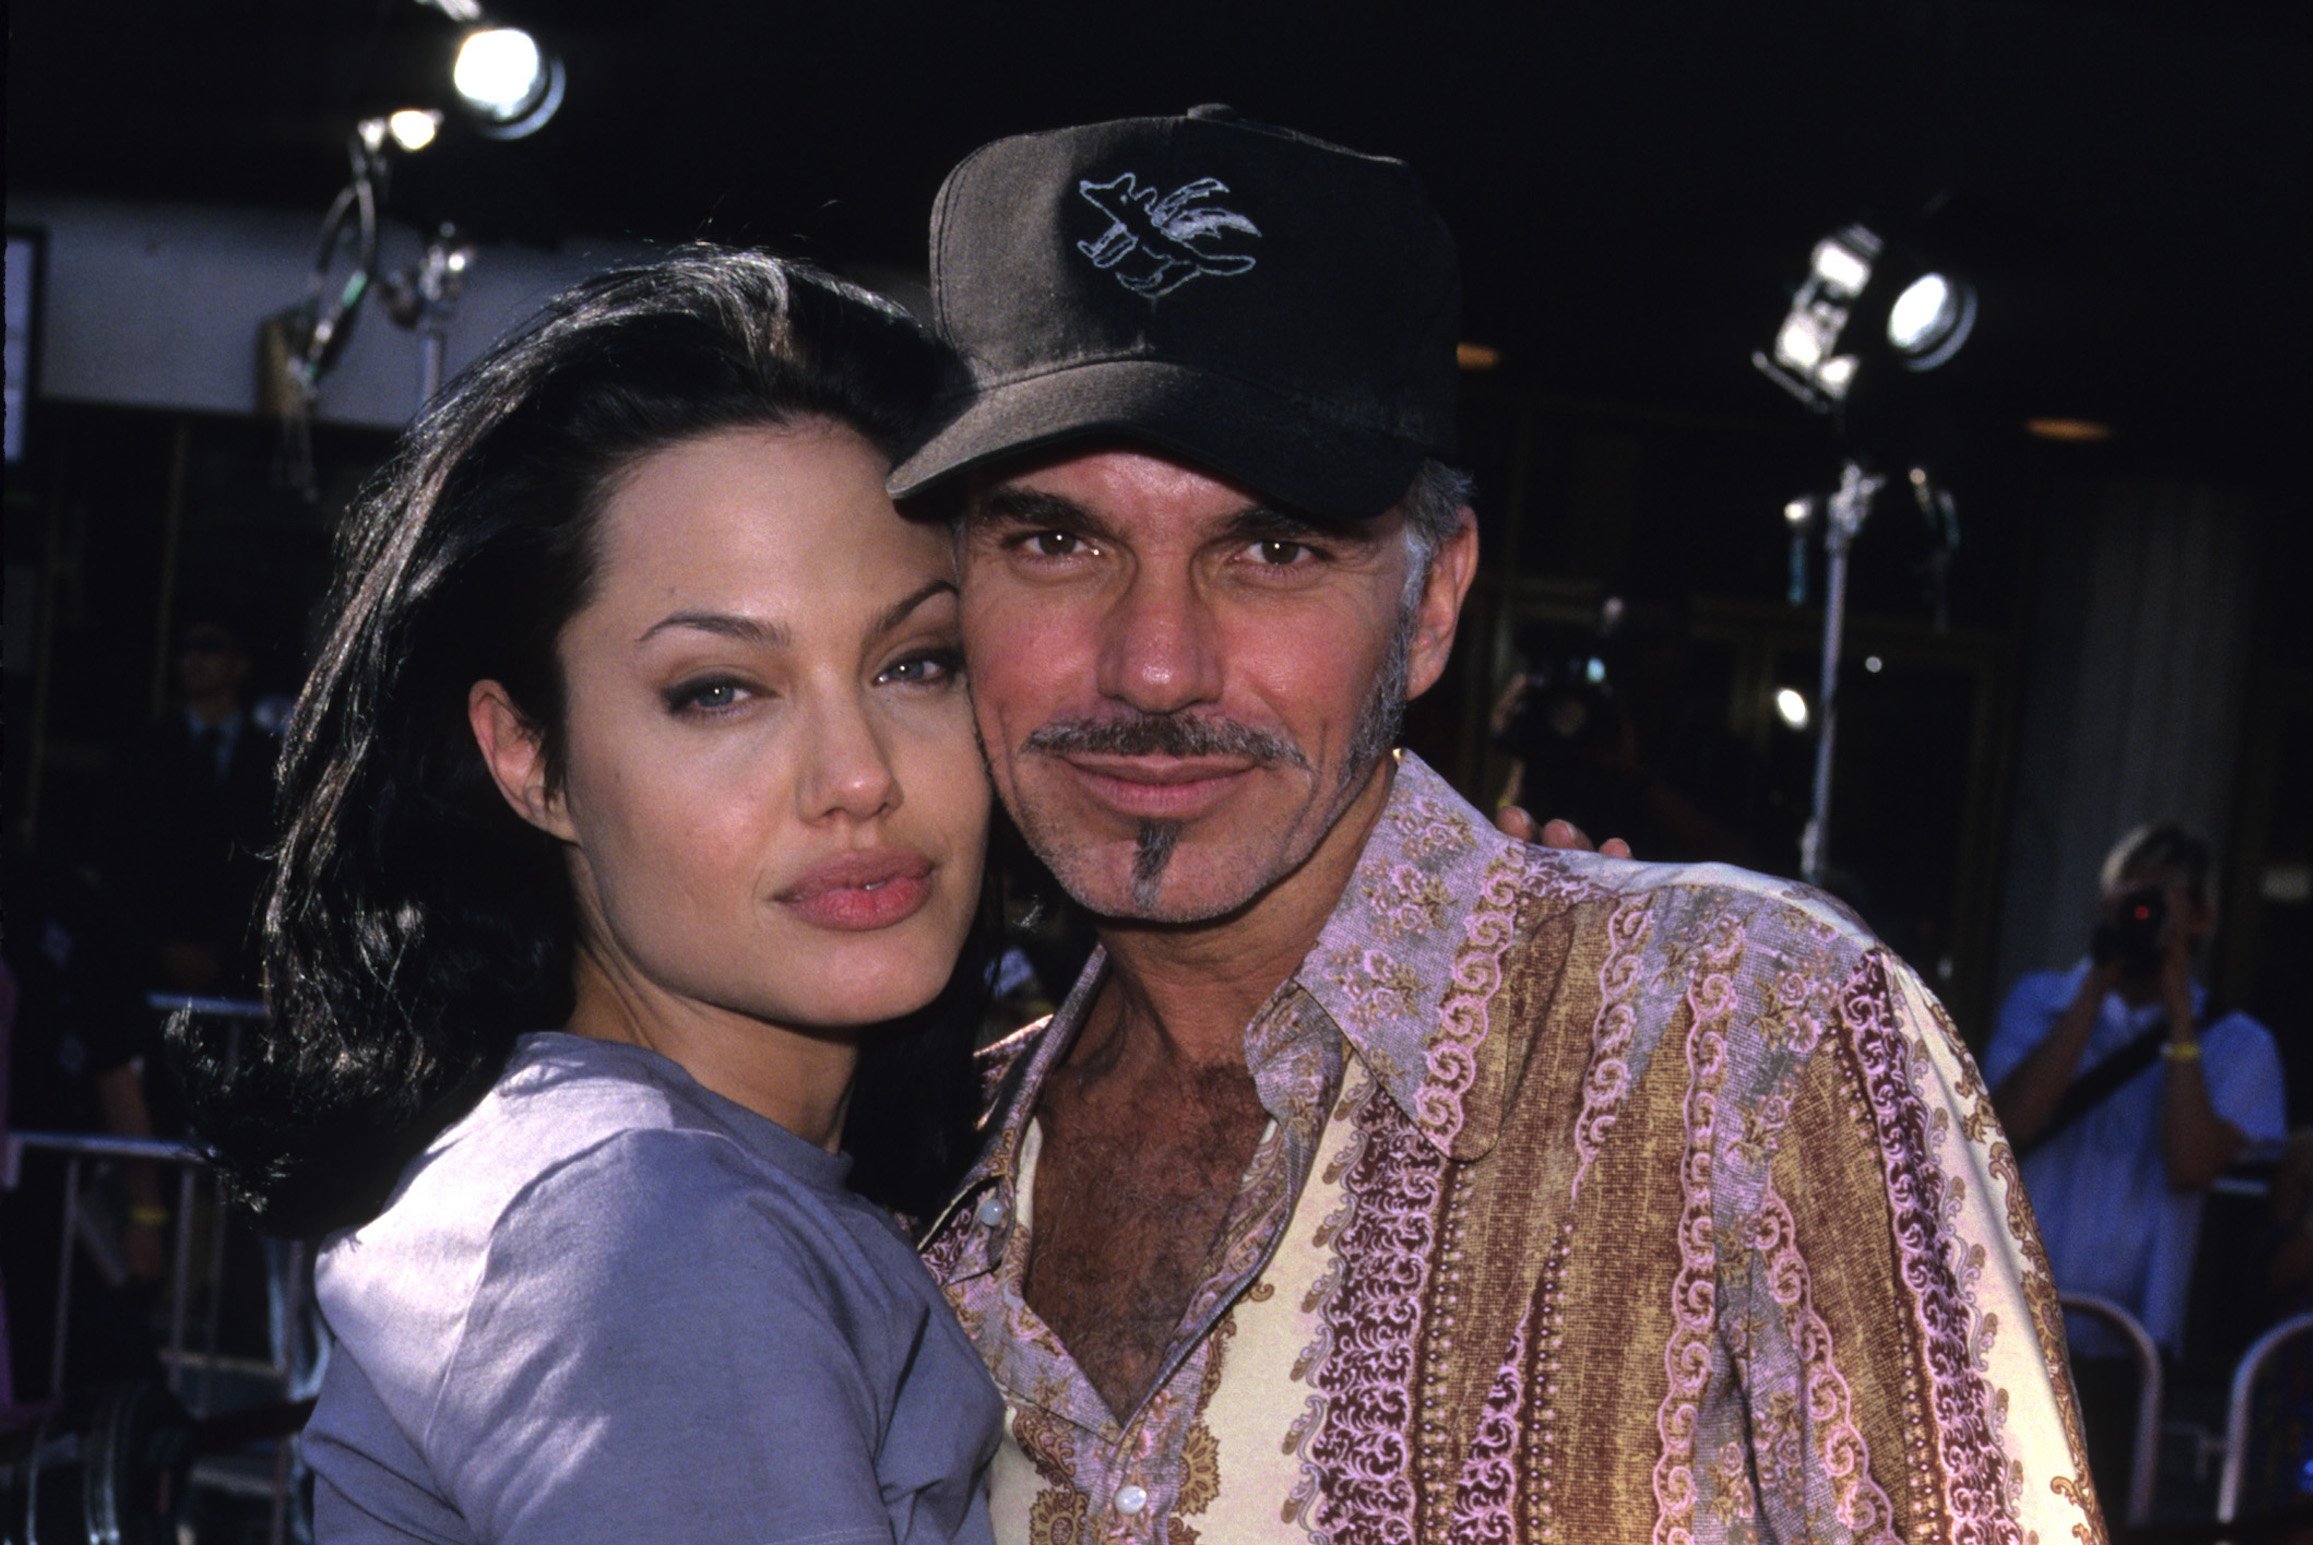 Angelina Jolie and Billy Bob Thornton Had Sex in the Car On the Way to the Gone In 60 Seconds Premiere image pic